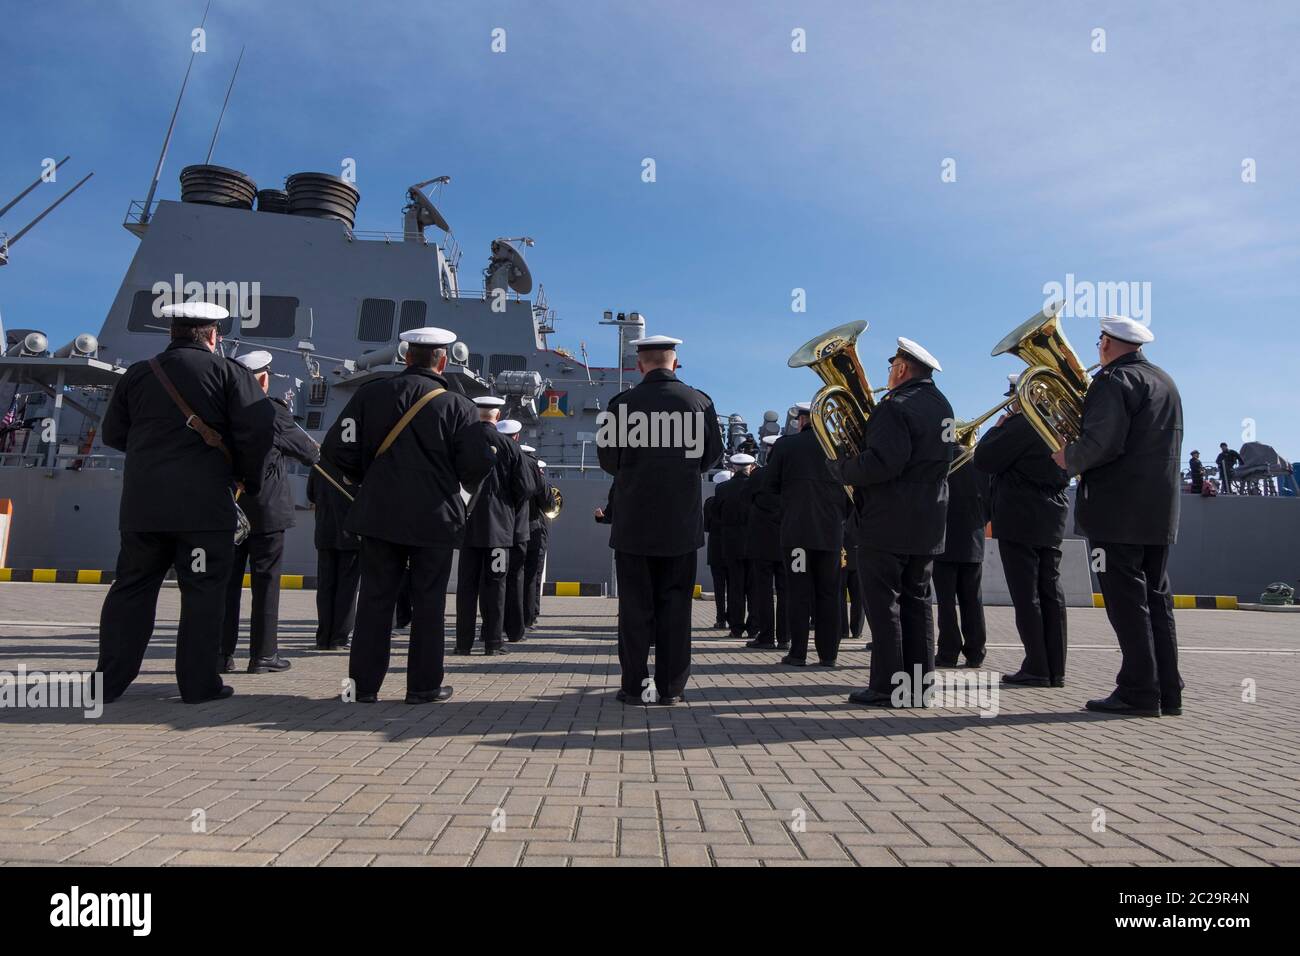 A local band welcomes the USS Navy Donald Cook for a ship visit. In Klaipėda, Lithuania. Stock Photo